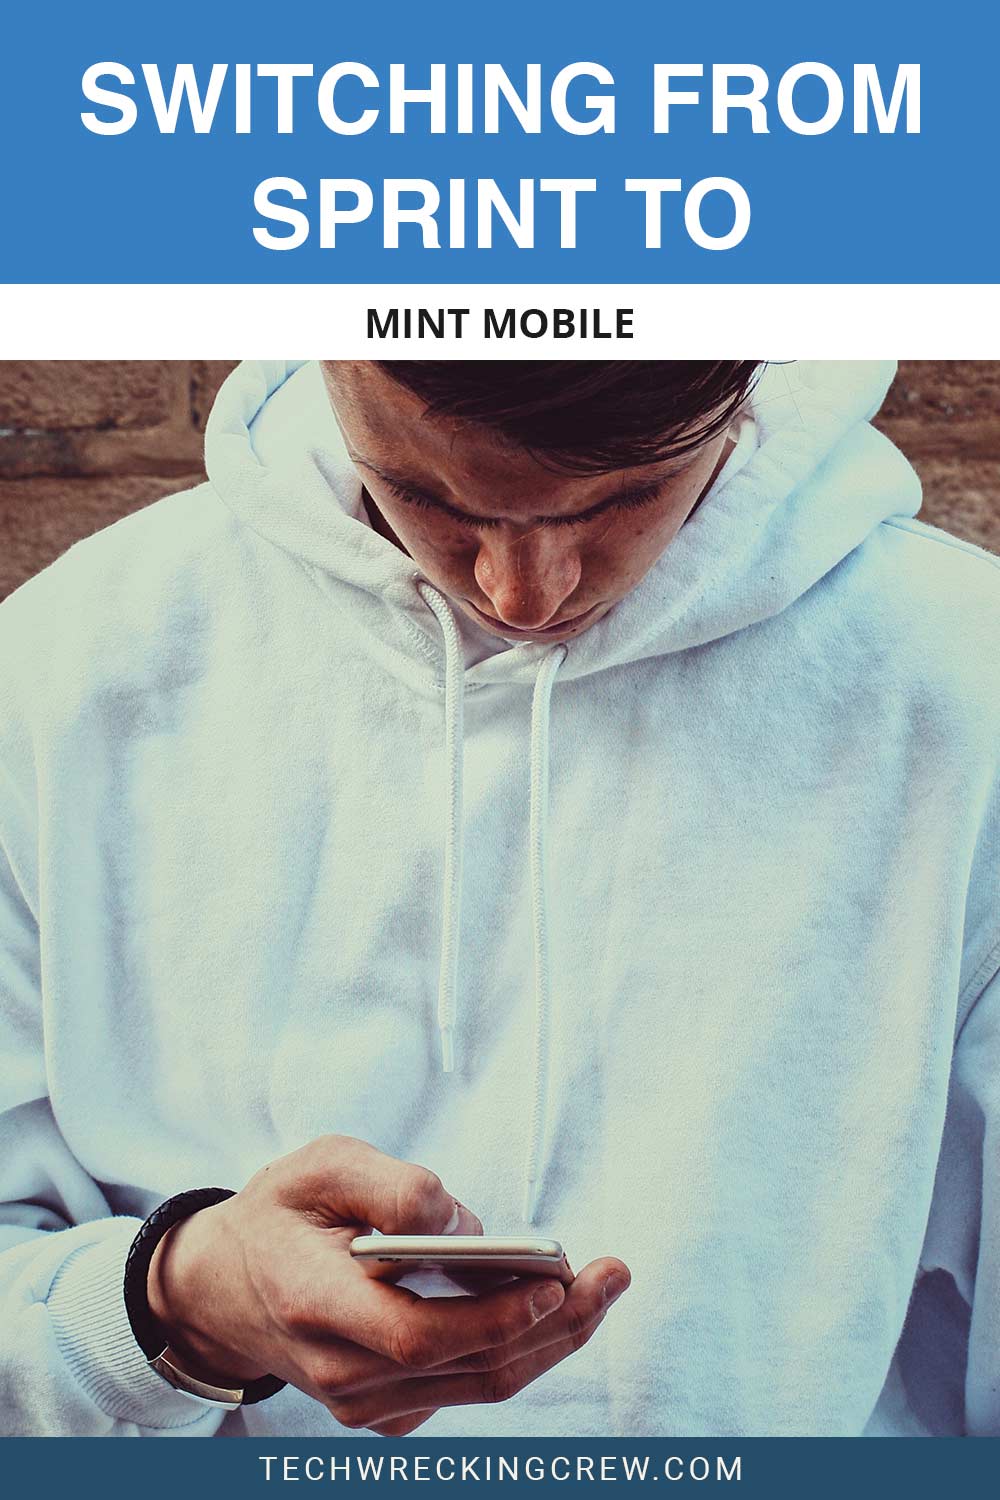 Switching from Sprint to Mint Mobile